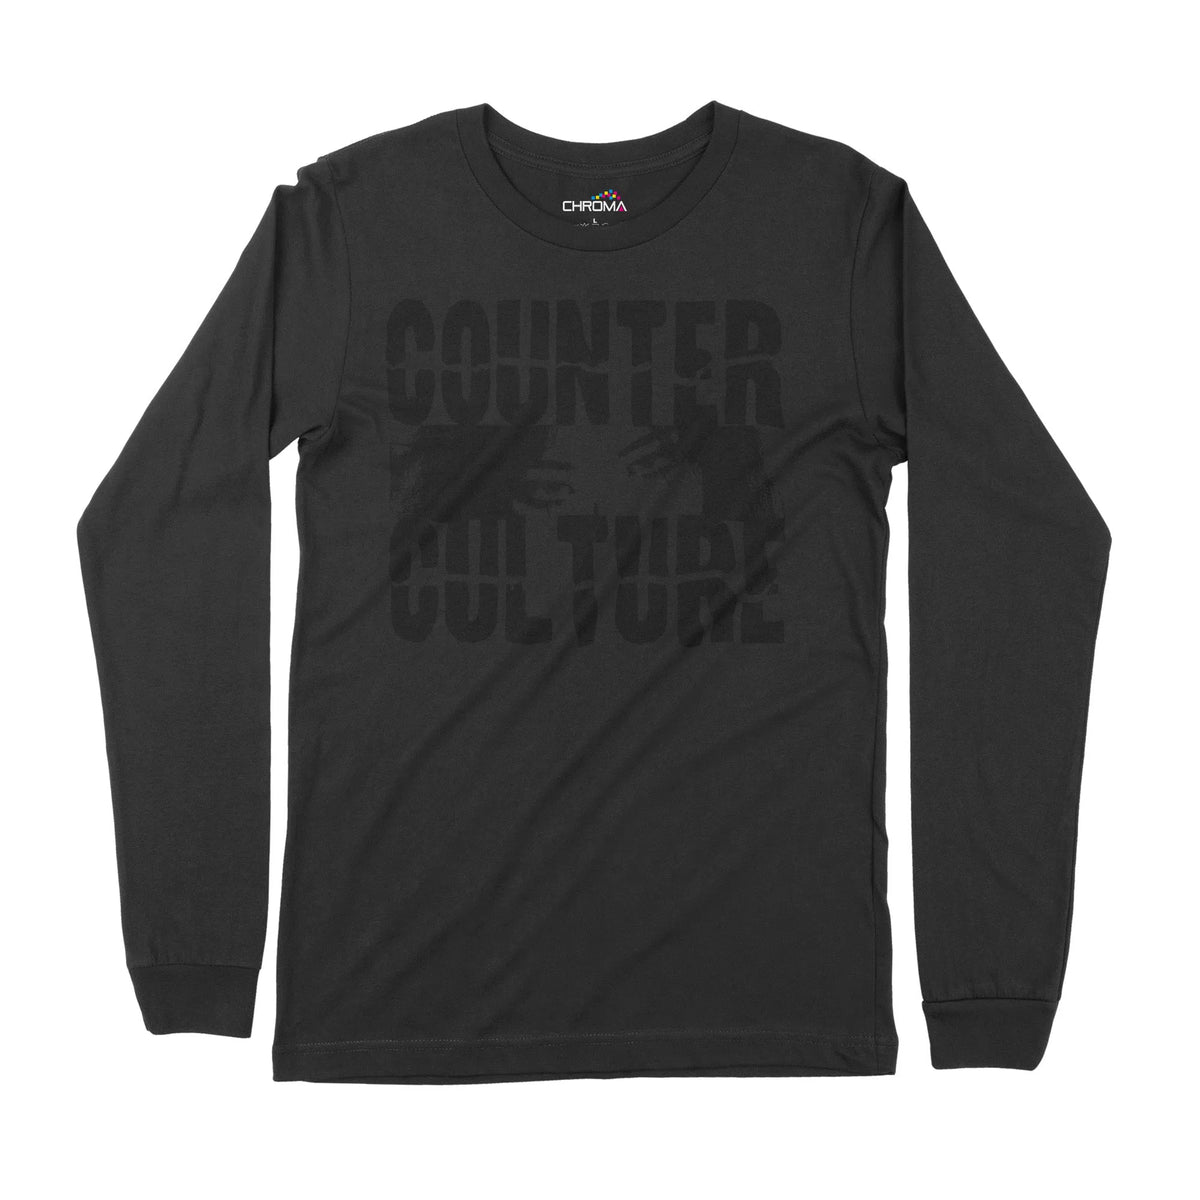 Counter Culture | Long-Sleeve T-Shirt | Premium Quality Streetwear Chroma Clothing